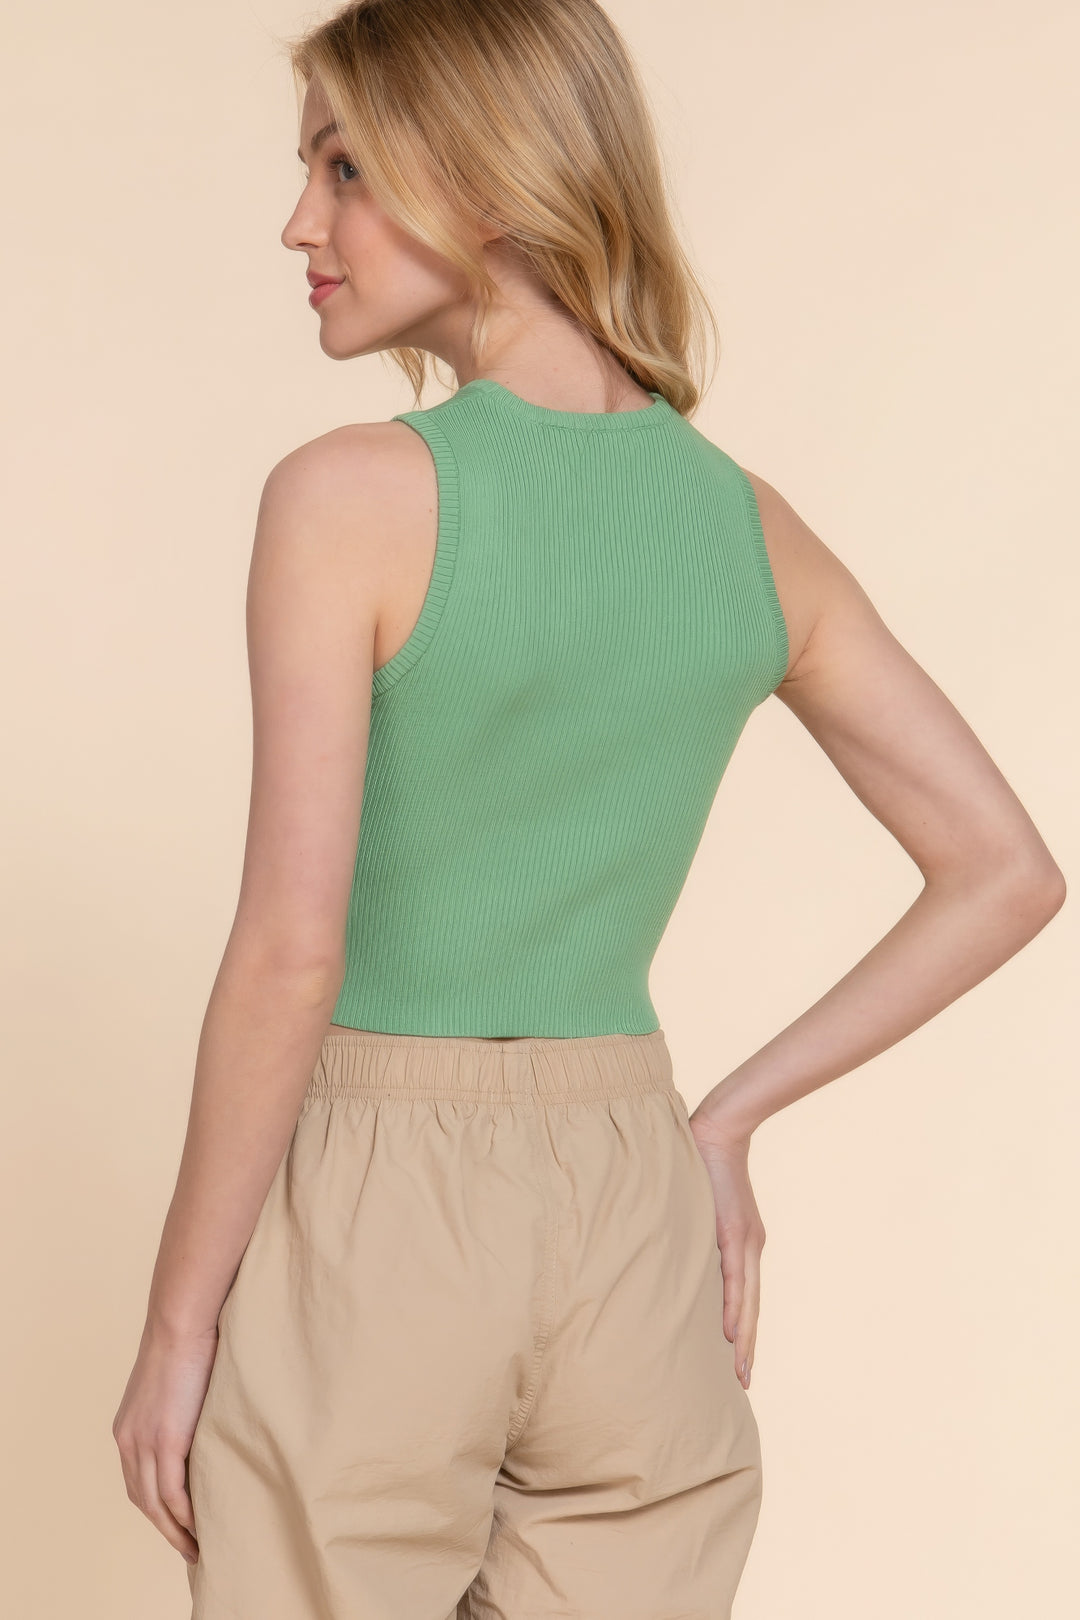 Sleeveless with Sheer Contrast Knit Top